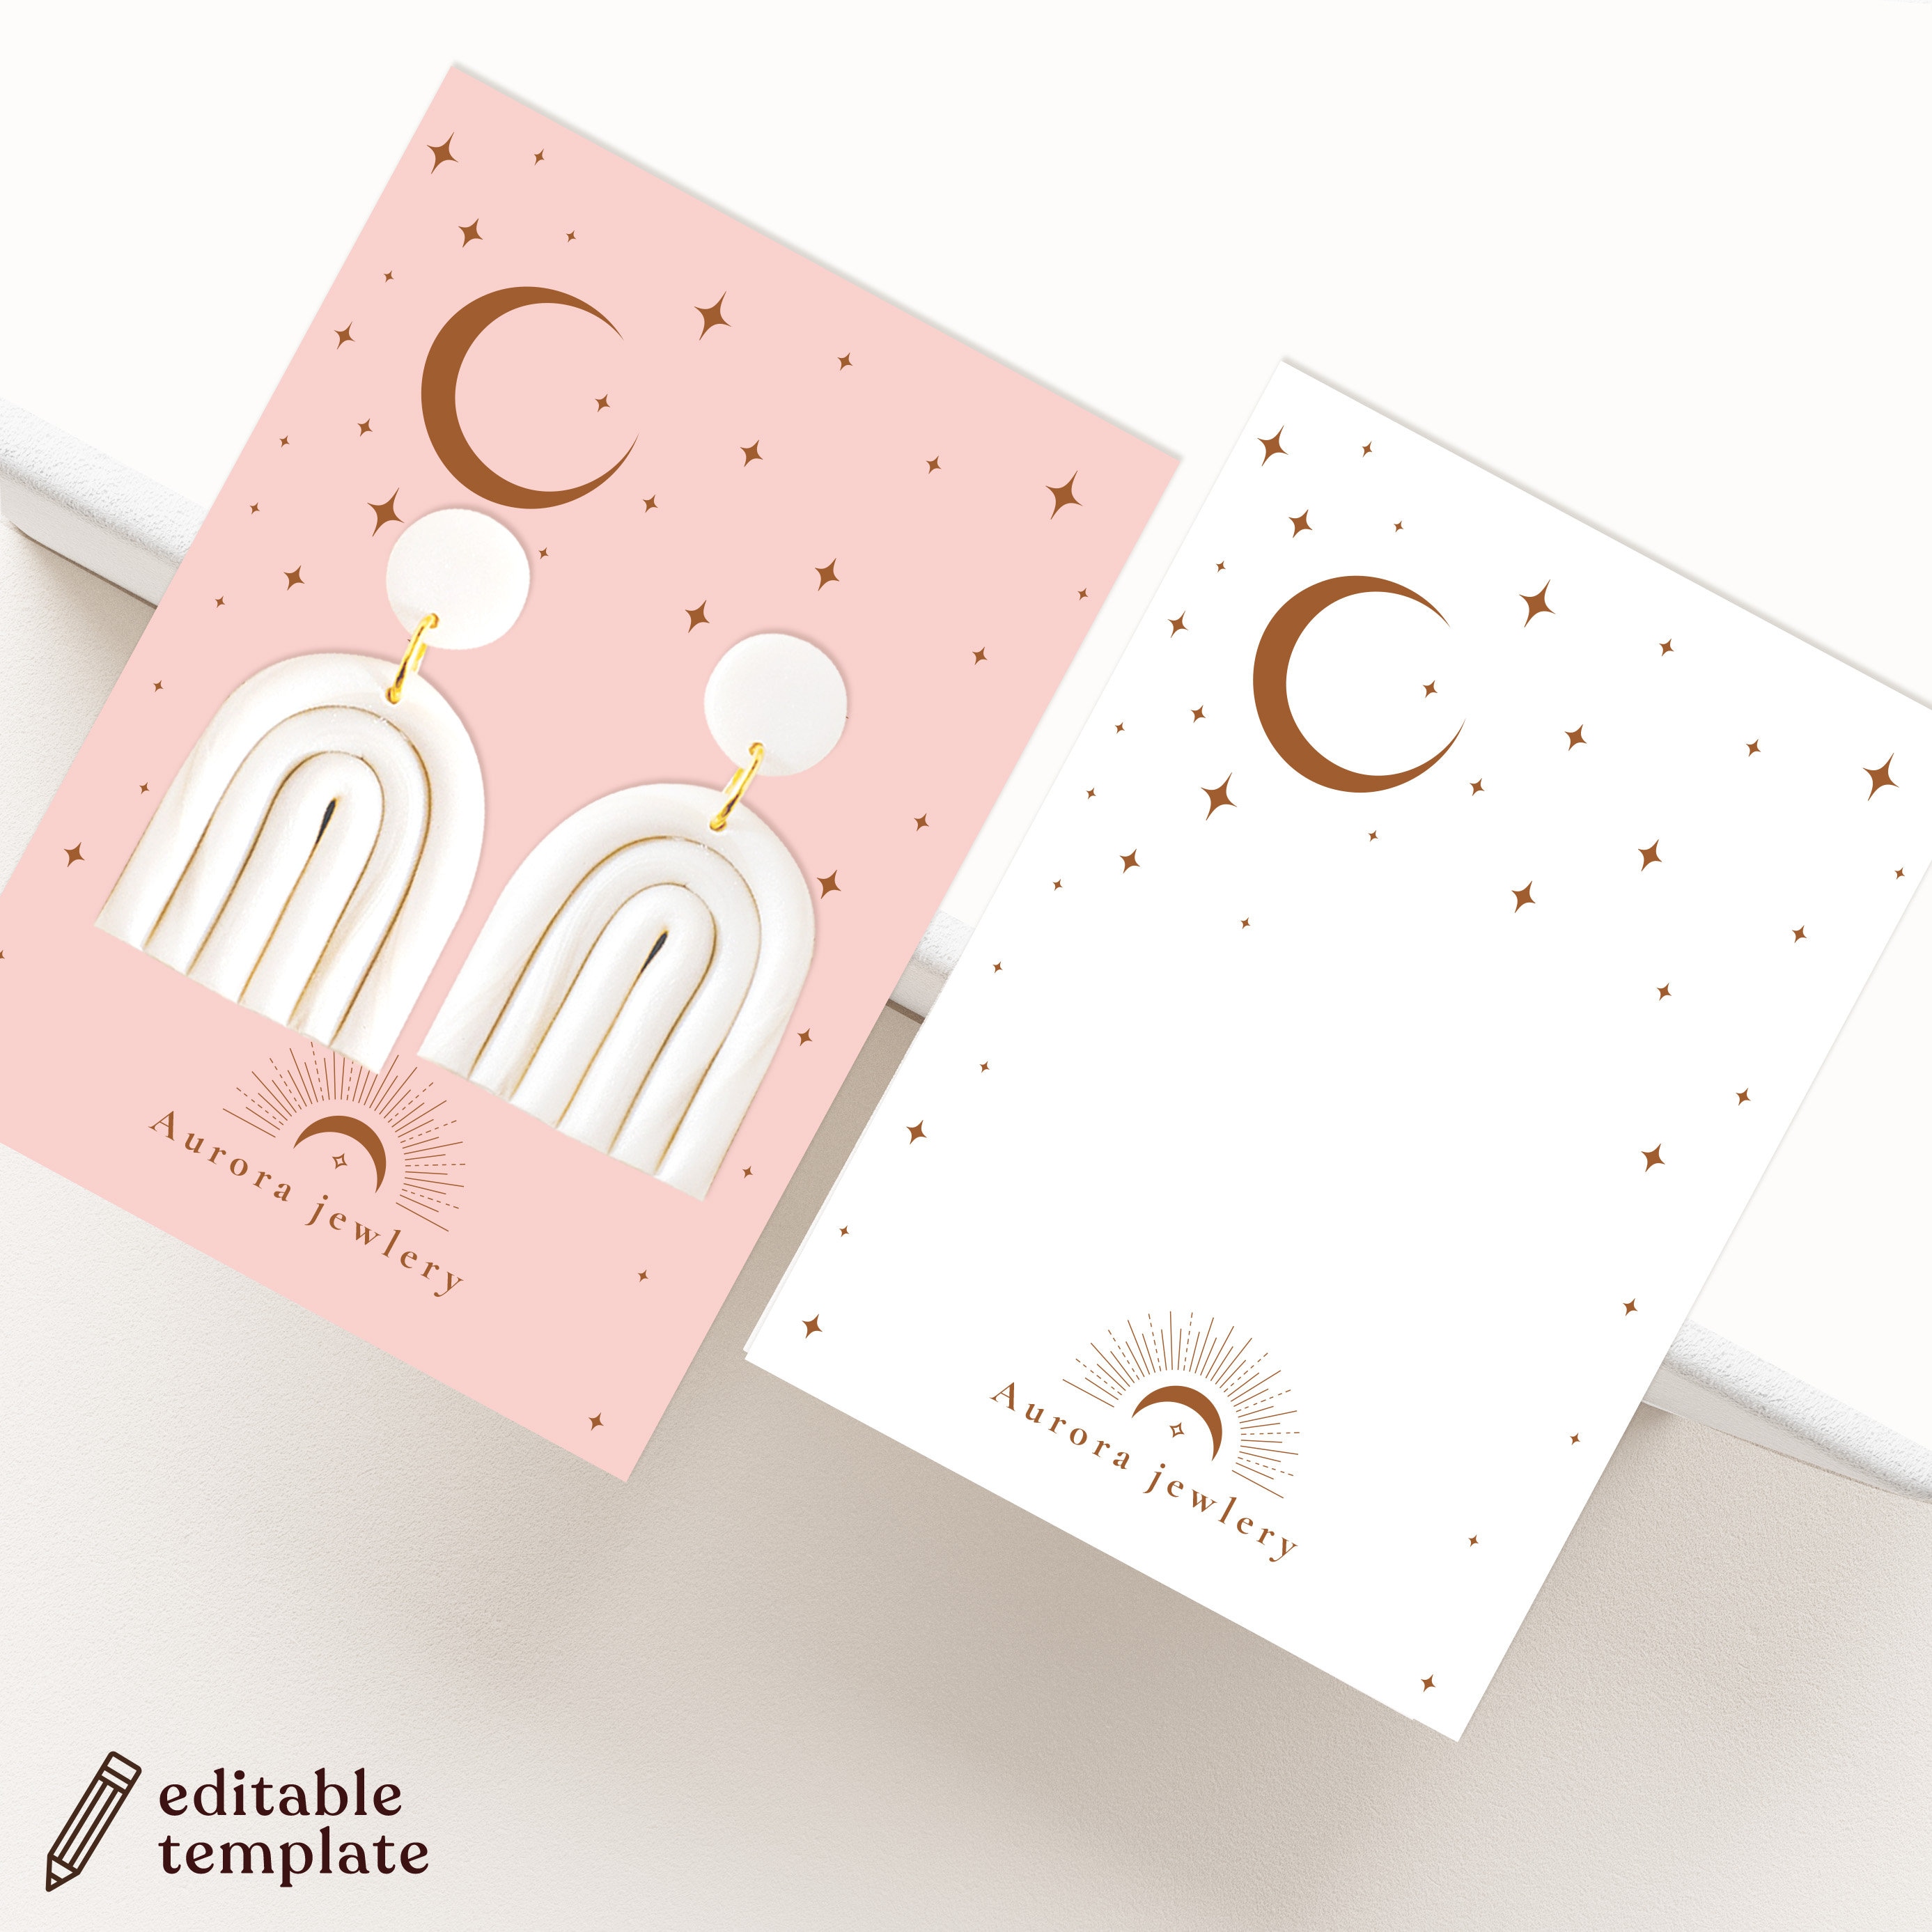 Custom Pure White Jewelry Cards, Embossing Earring Display Cards,  5x6cm,jewelry Packaging Cards, Jewelry Cards for Earrings Jewelry Supplies  